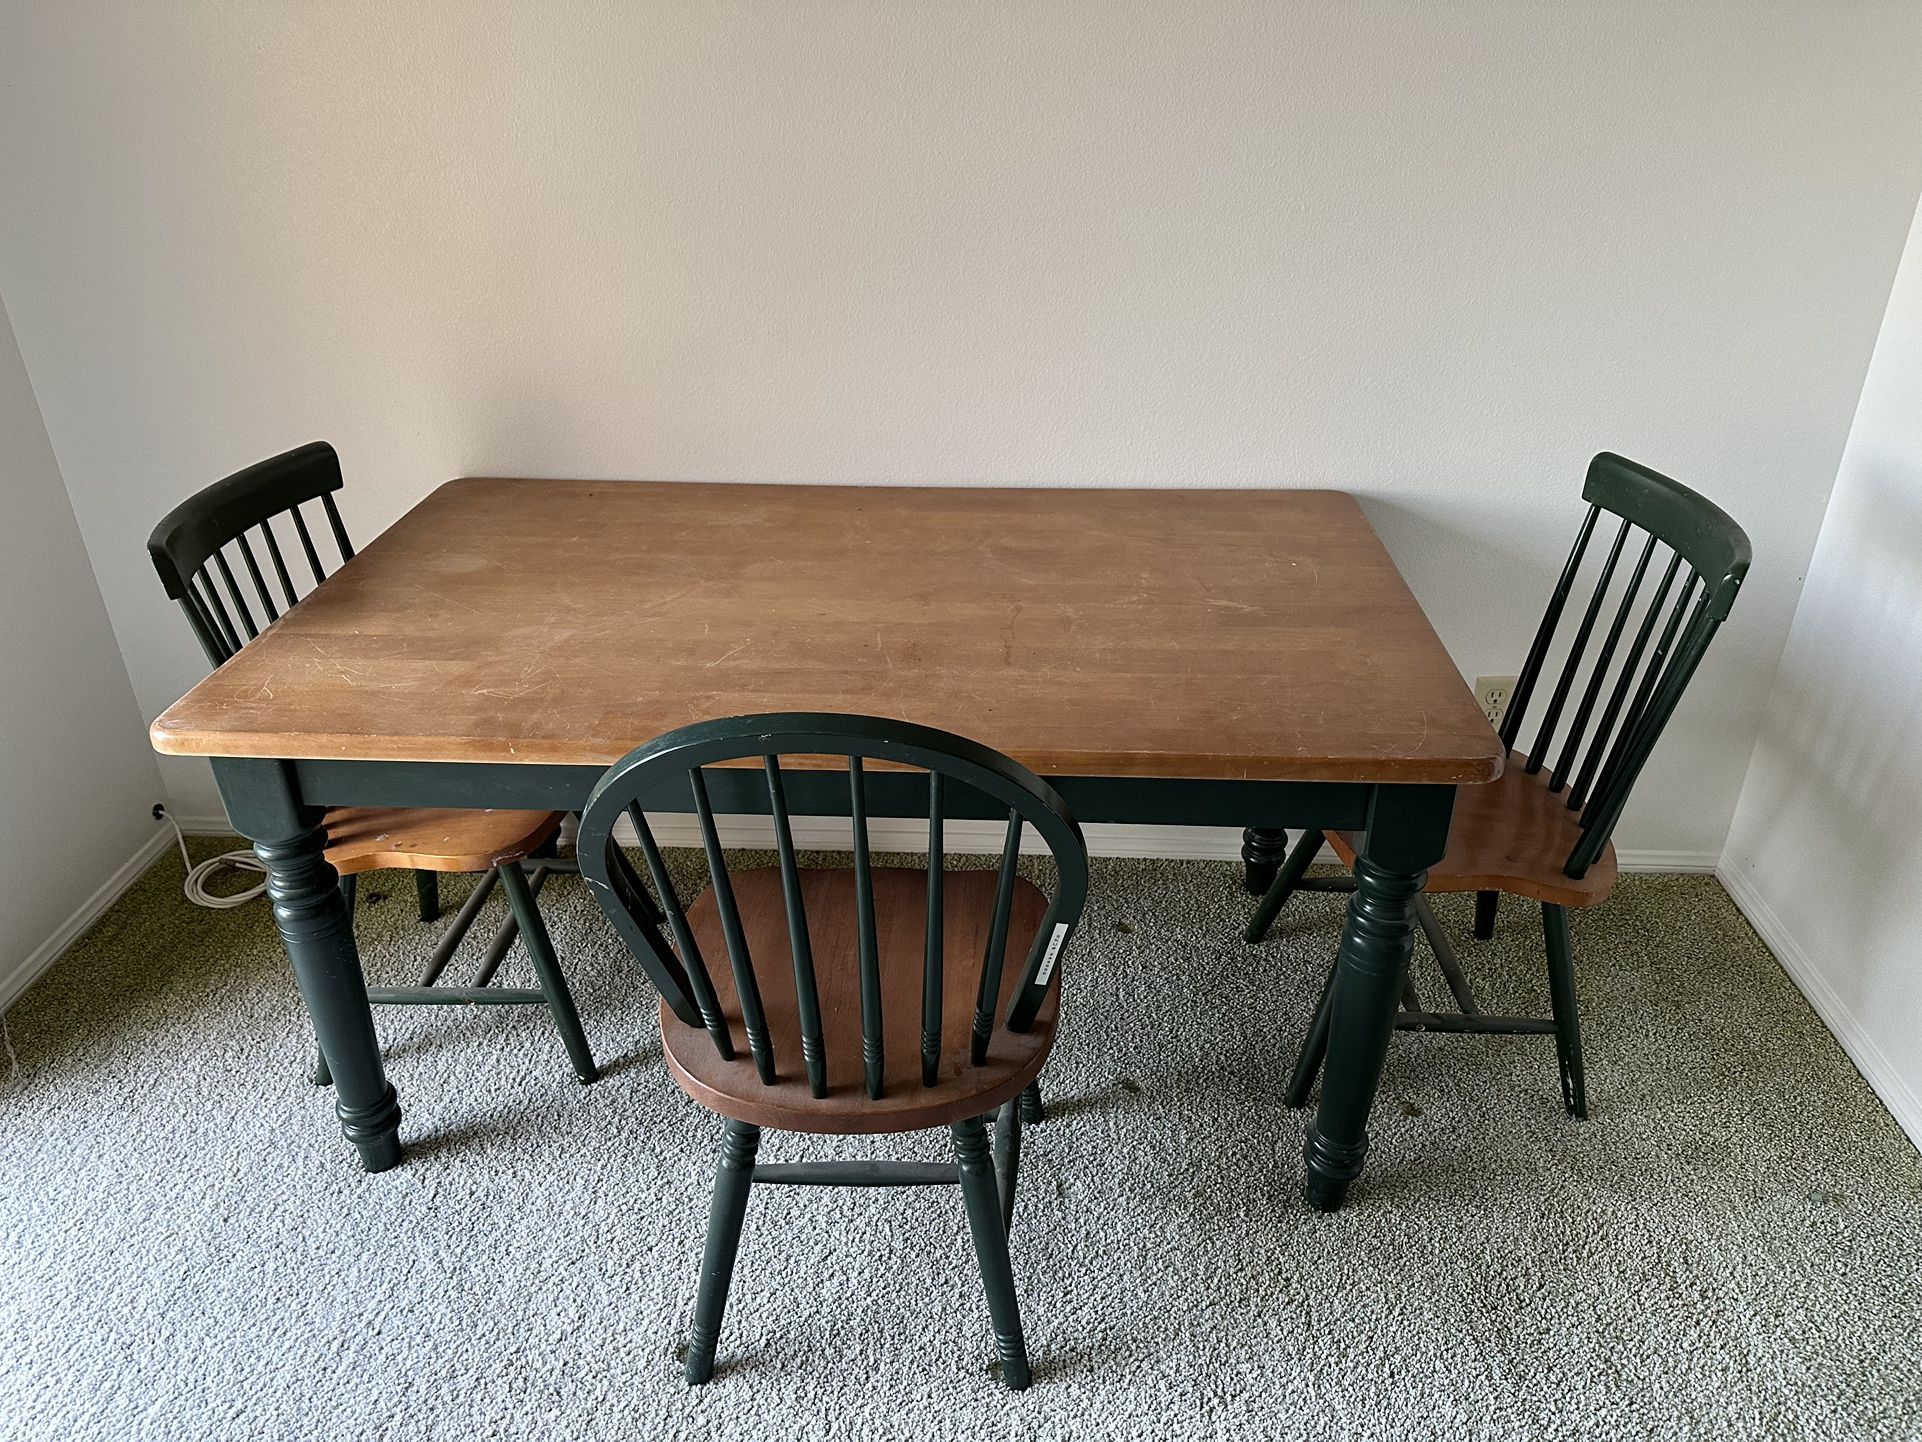  Table with 3 Chairs W36  L60